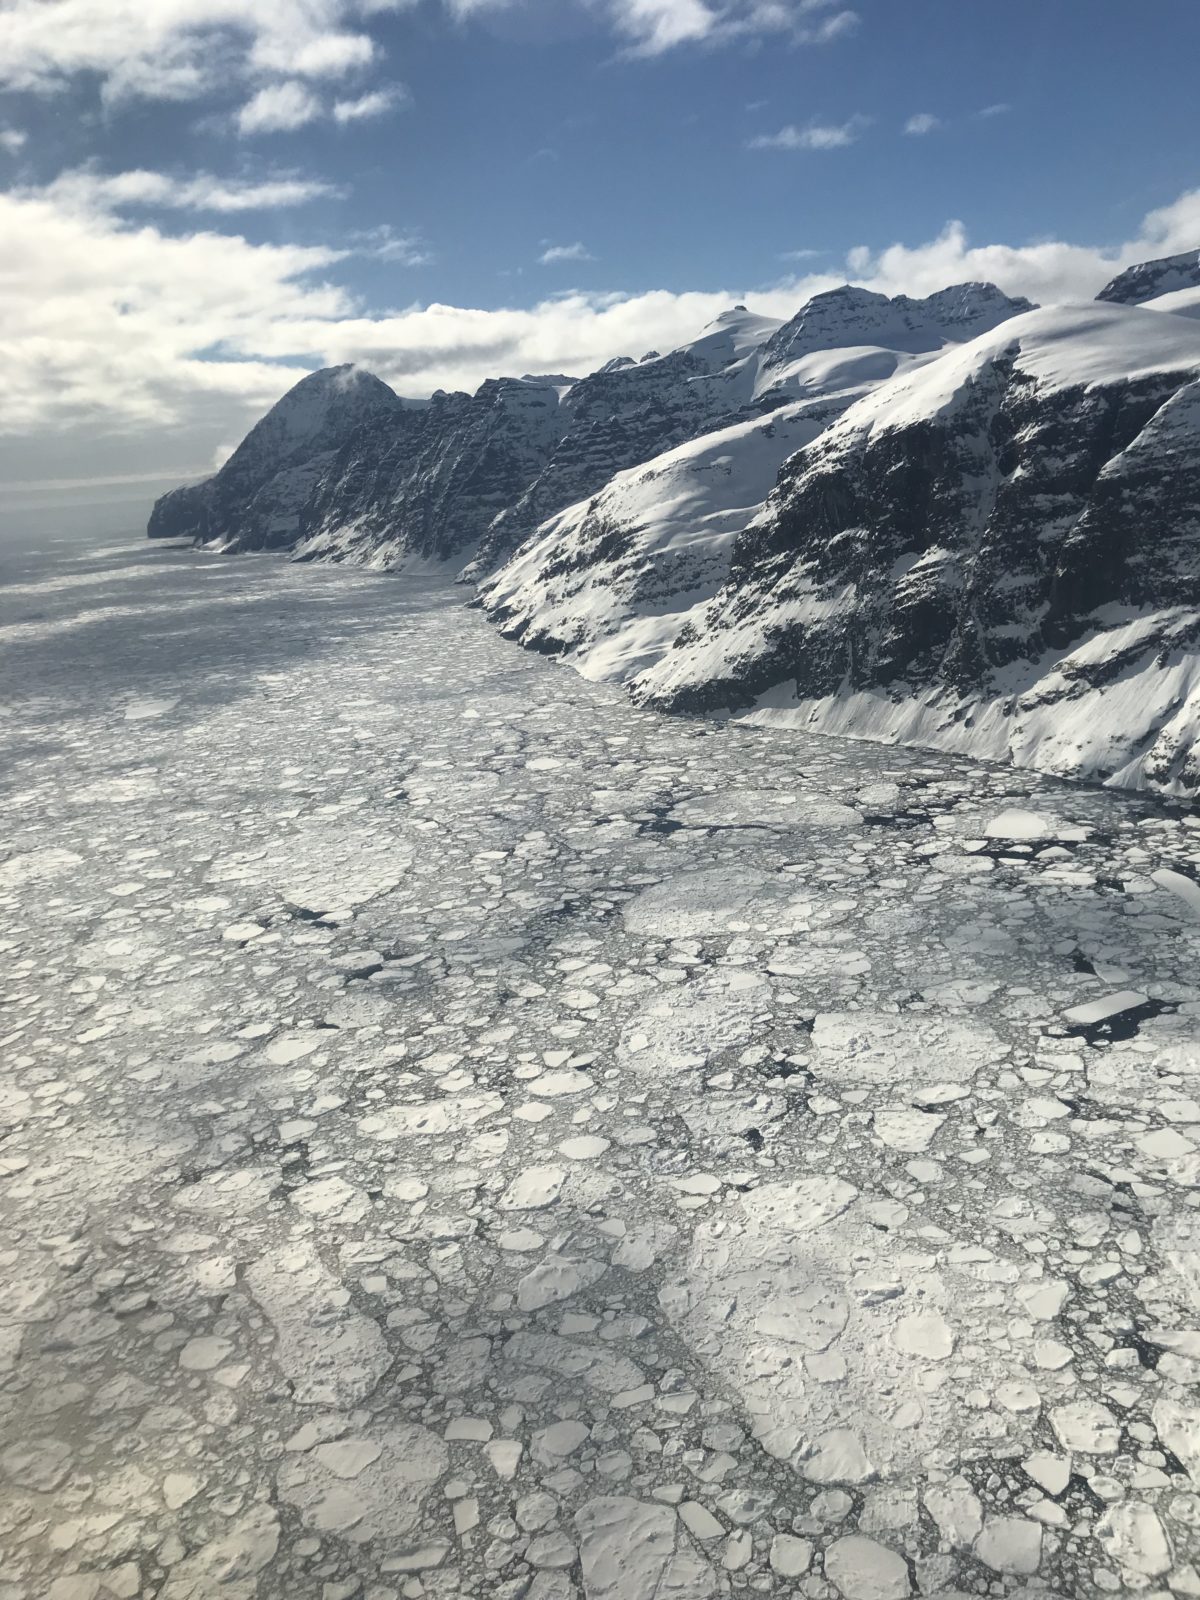 Photo of sea ice meeting with Greenland's cliffs and mountains.